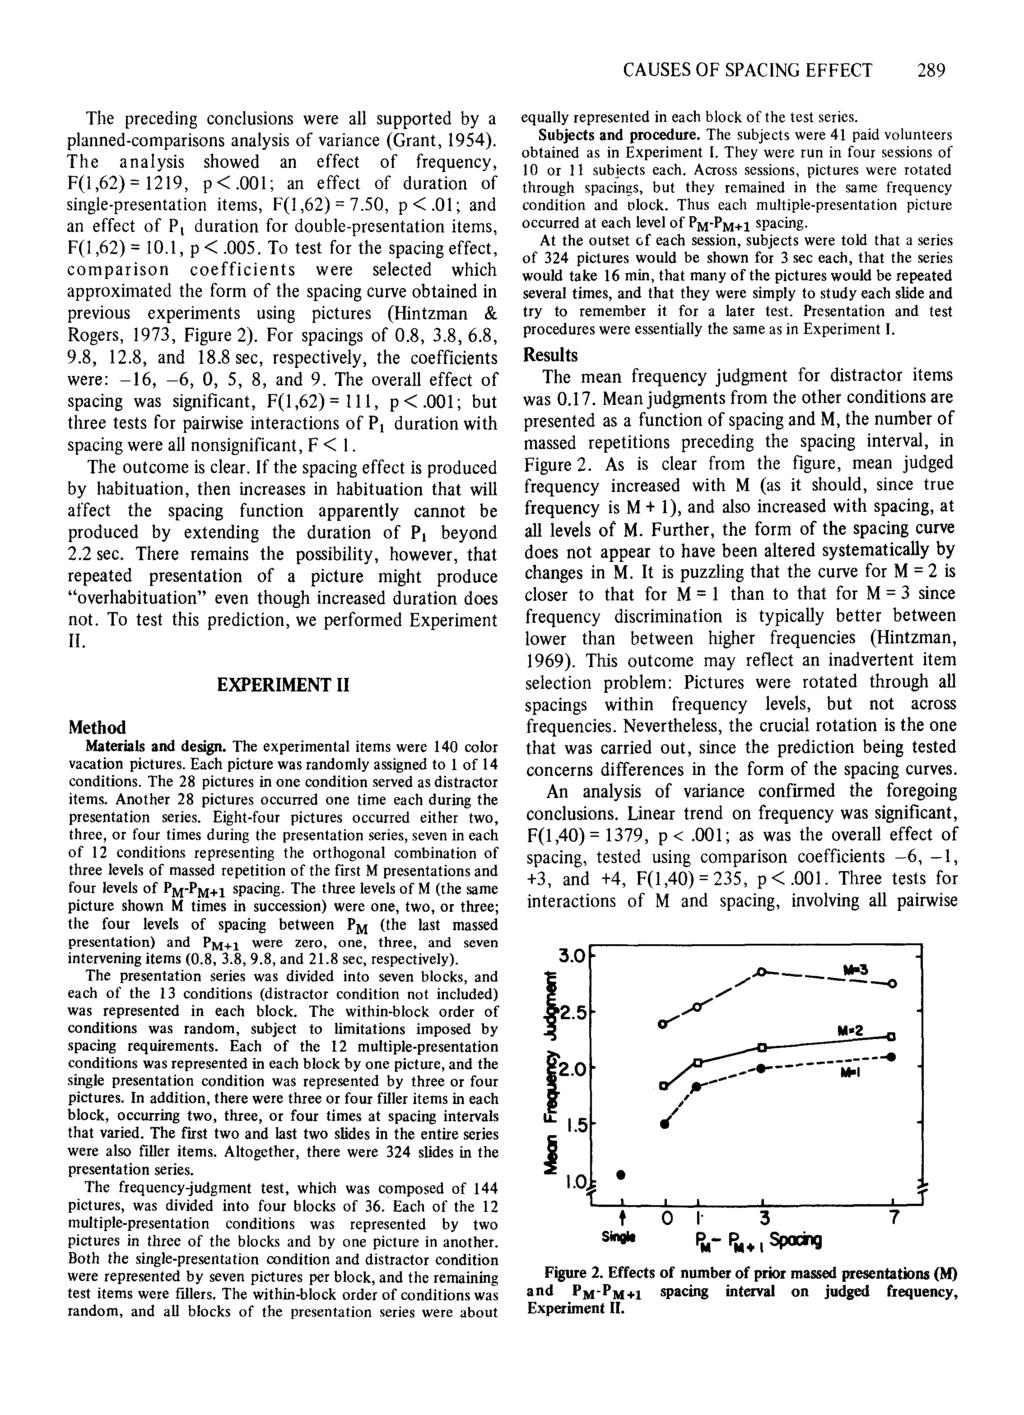 CAUSES OF SPACNG EFFECT 289 The preeding onlusions were all supported by a planned-omparisons analysis of variane (Grant, 1954). The analysis showed an effet of frequeny, F(1,62) = 1219, p<.